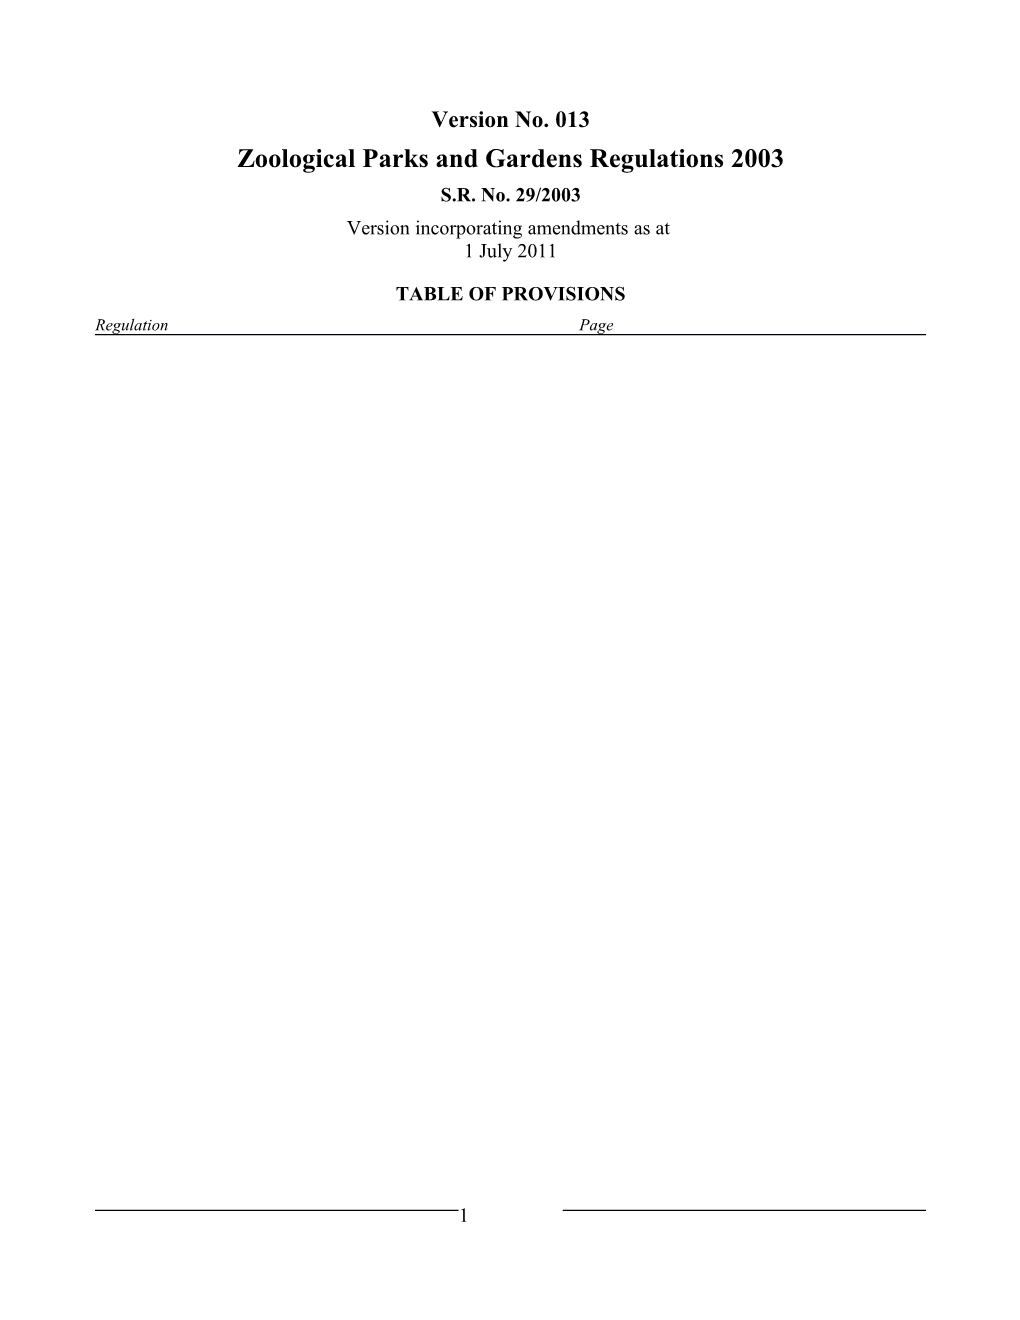 Zoological Parks and Gardens Regulations 2003